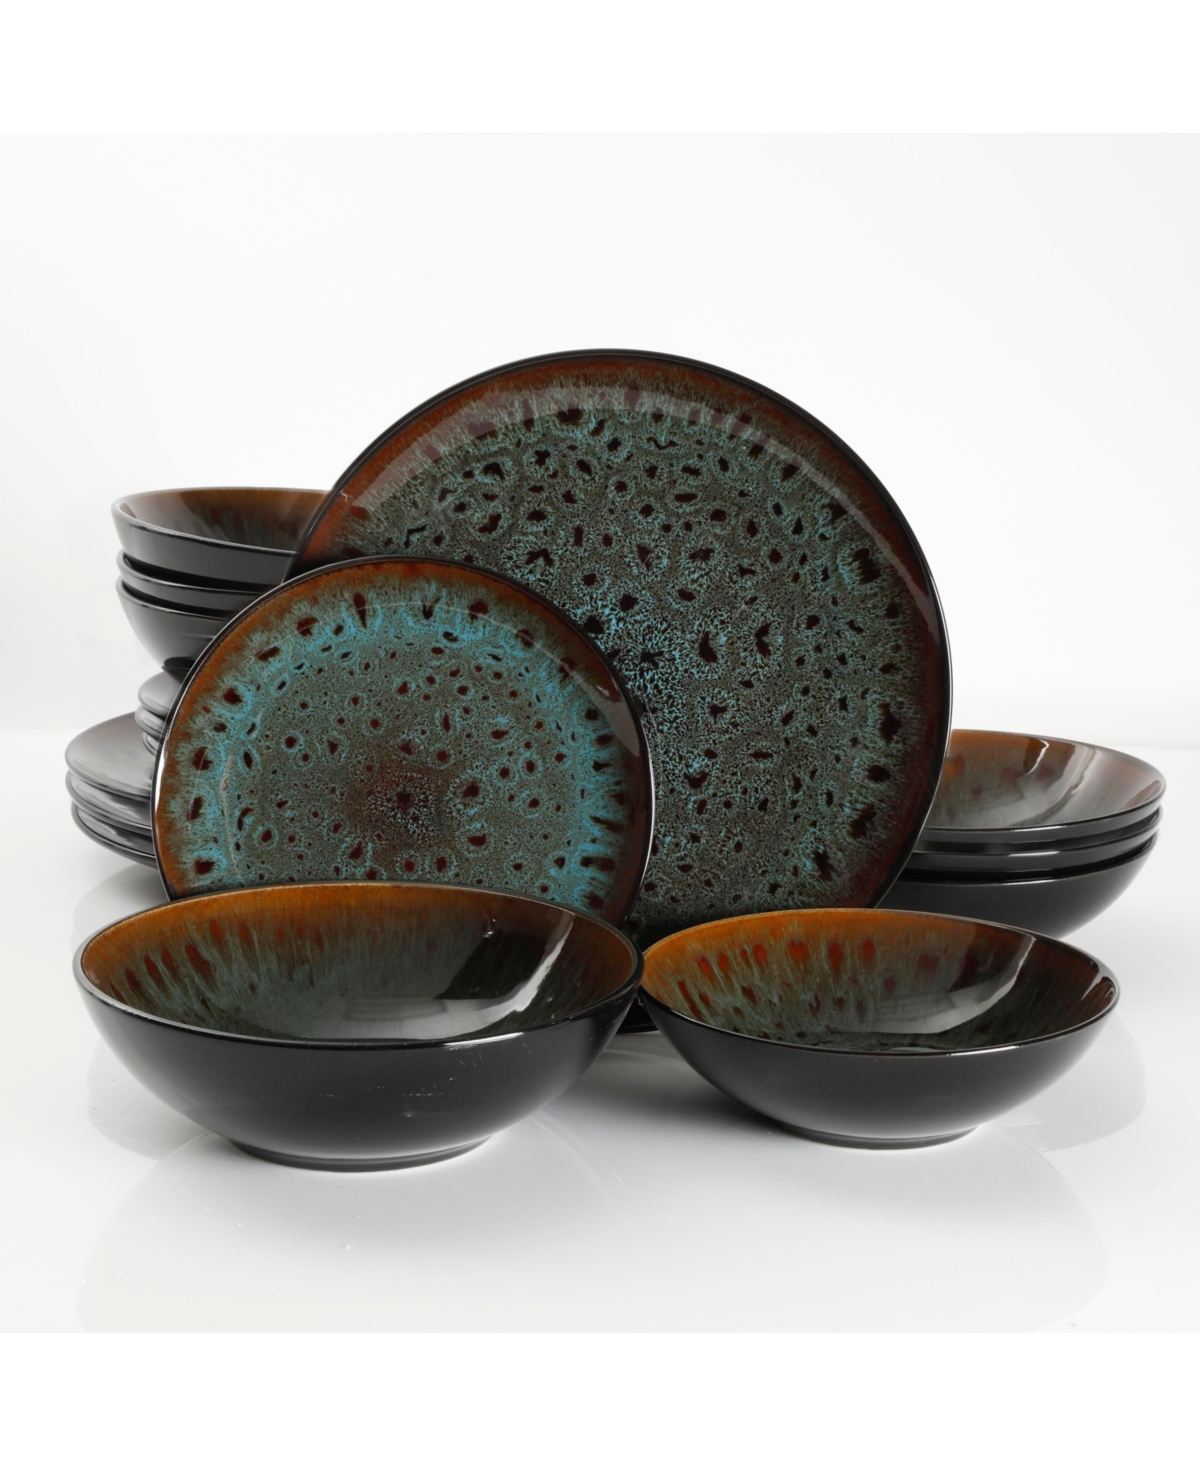 Kyoto Teal 16-piece Double Bowls Dinnerware Set, Service for 4 - Teal